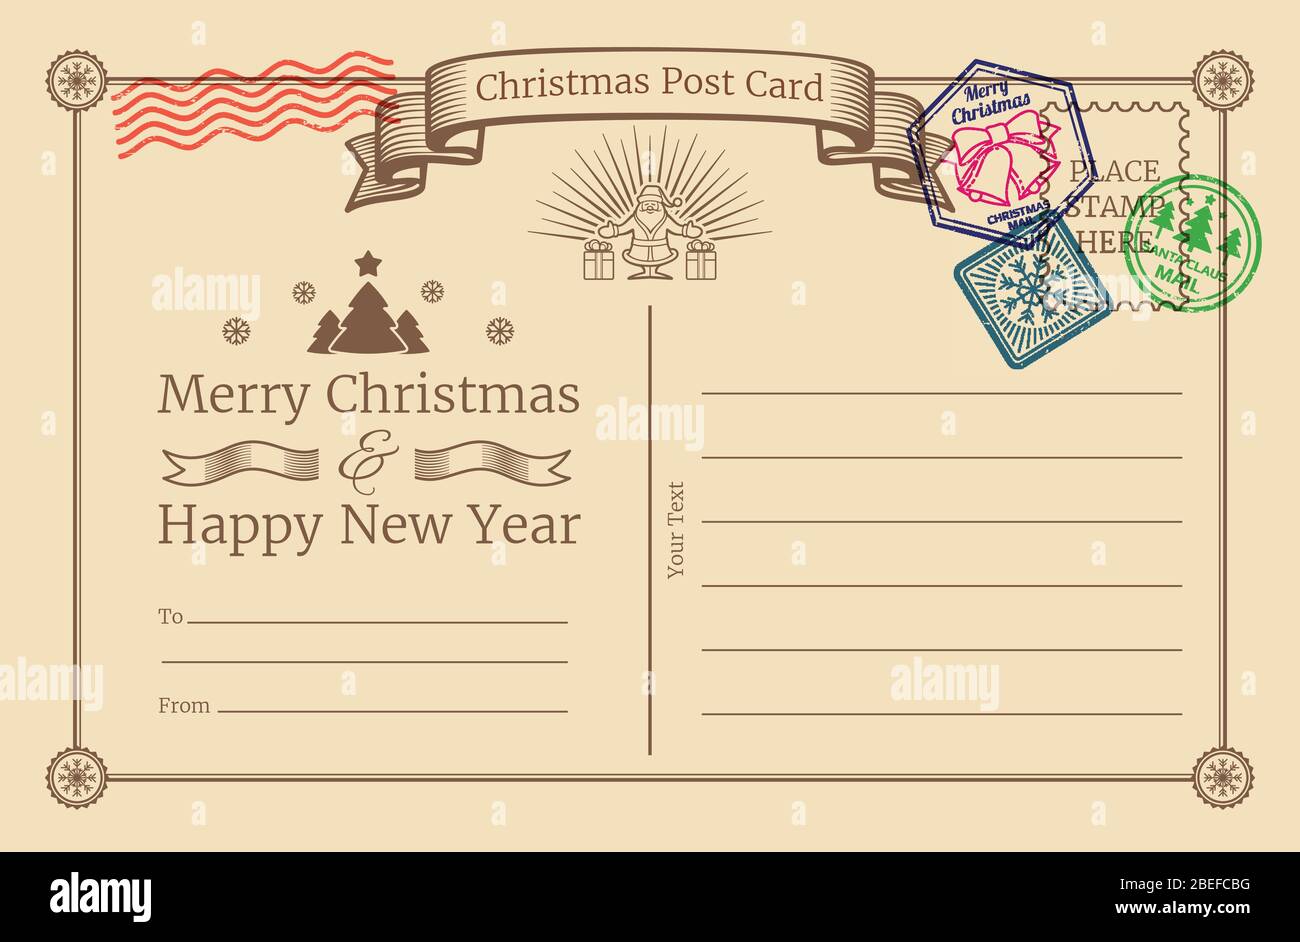 Vector old christmas holiday postcard with santa stamps. Christmas and new year postcard blank illustration Stock Vector